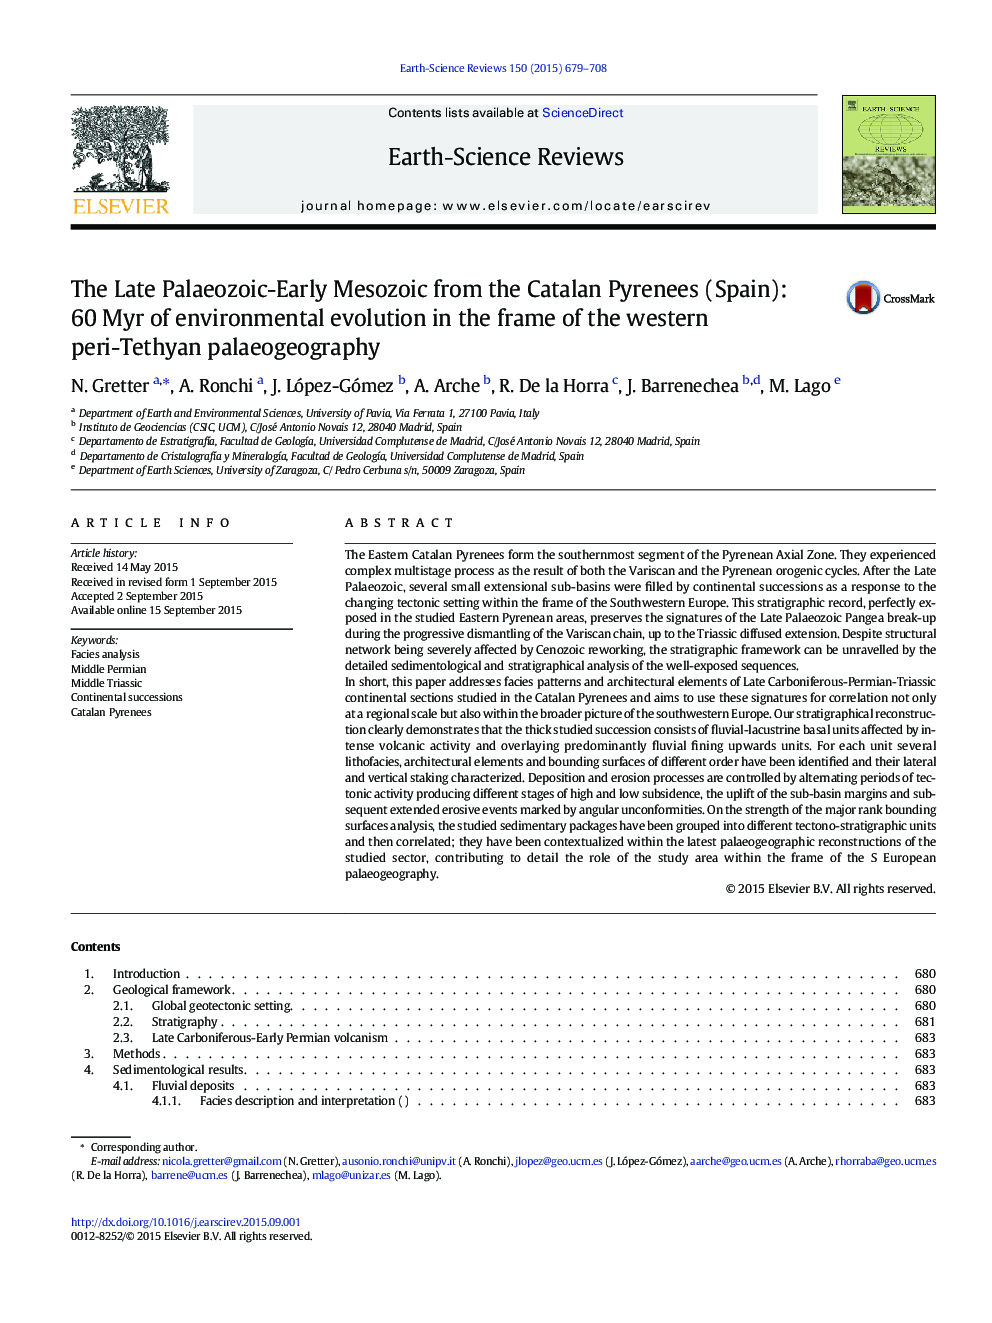 The Late Palaeozoic-Early Mesozoic from the Catalan Pyrenees (Spain): 60Â Myr of environmental evolution in the frame of the western peri-Tethyan palaeogeography